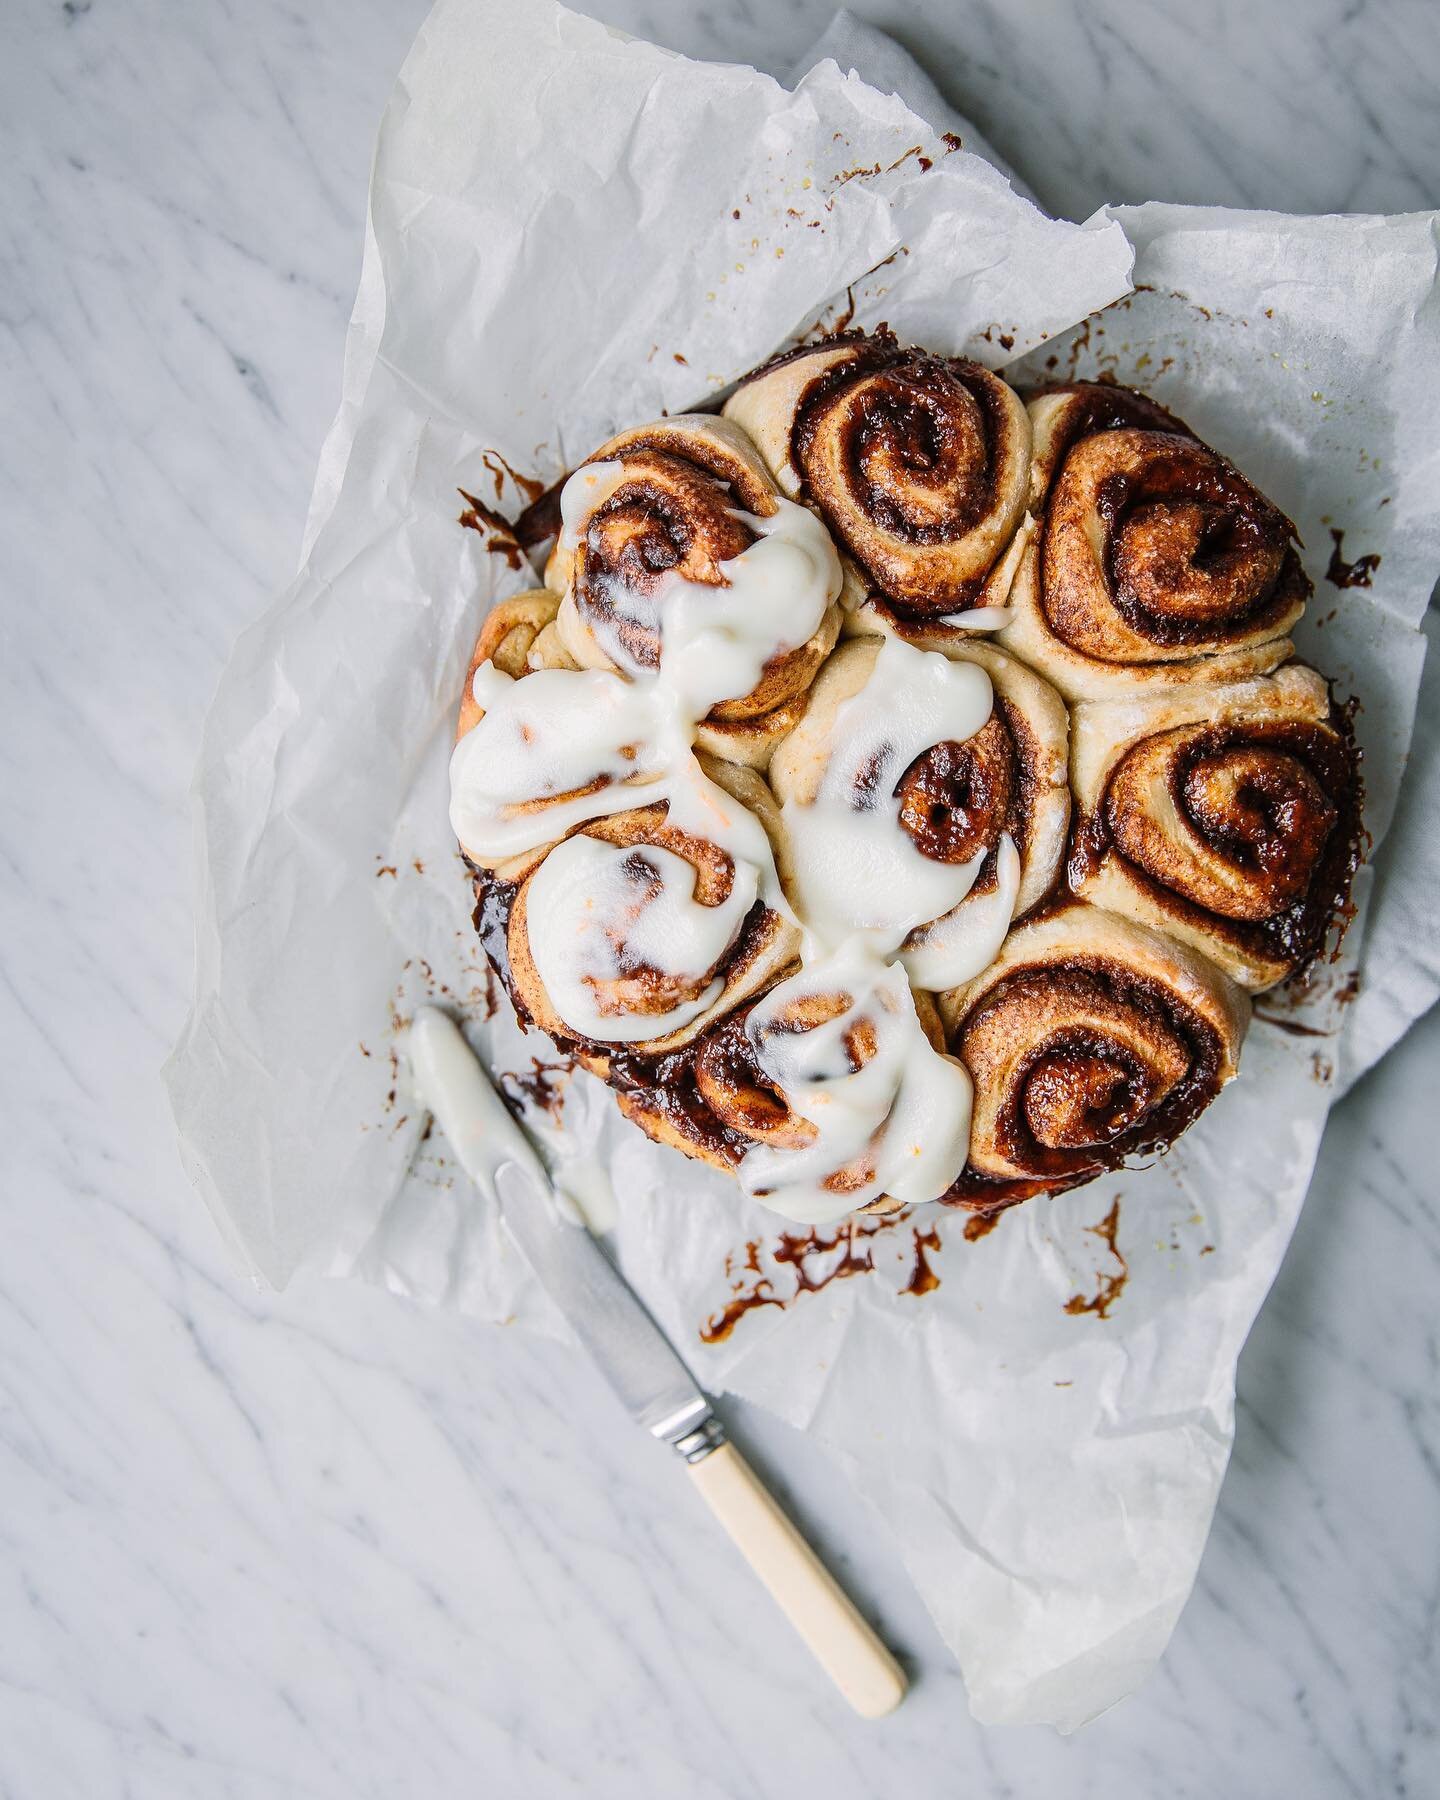 First day of the year, first time making cinnamon rolls. To be honest I haven't accomplished a lot in 2020, but one thing&nbsp;I'm proud of is to have started working with sourdough. If you're thinking about it, I'd highly encourage you to go for it 